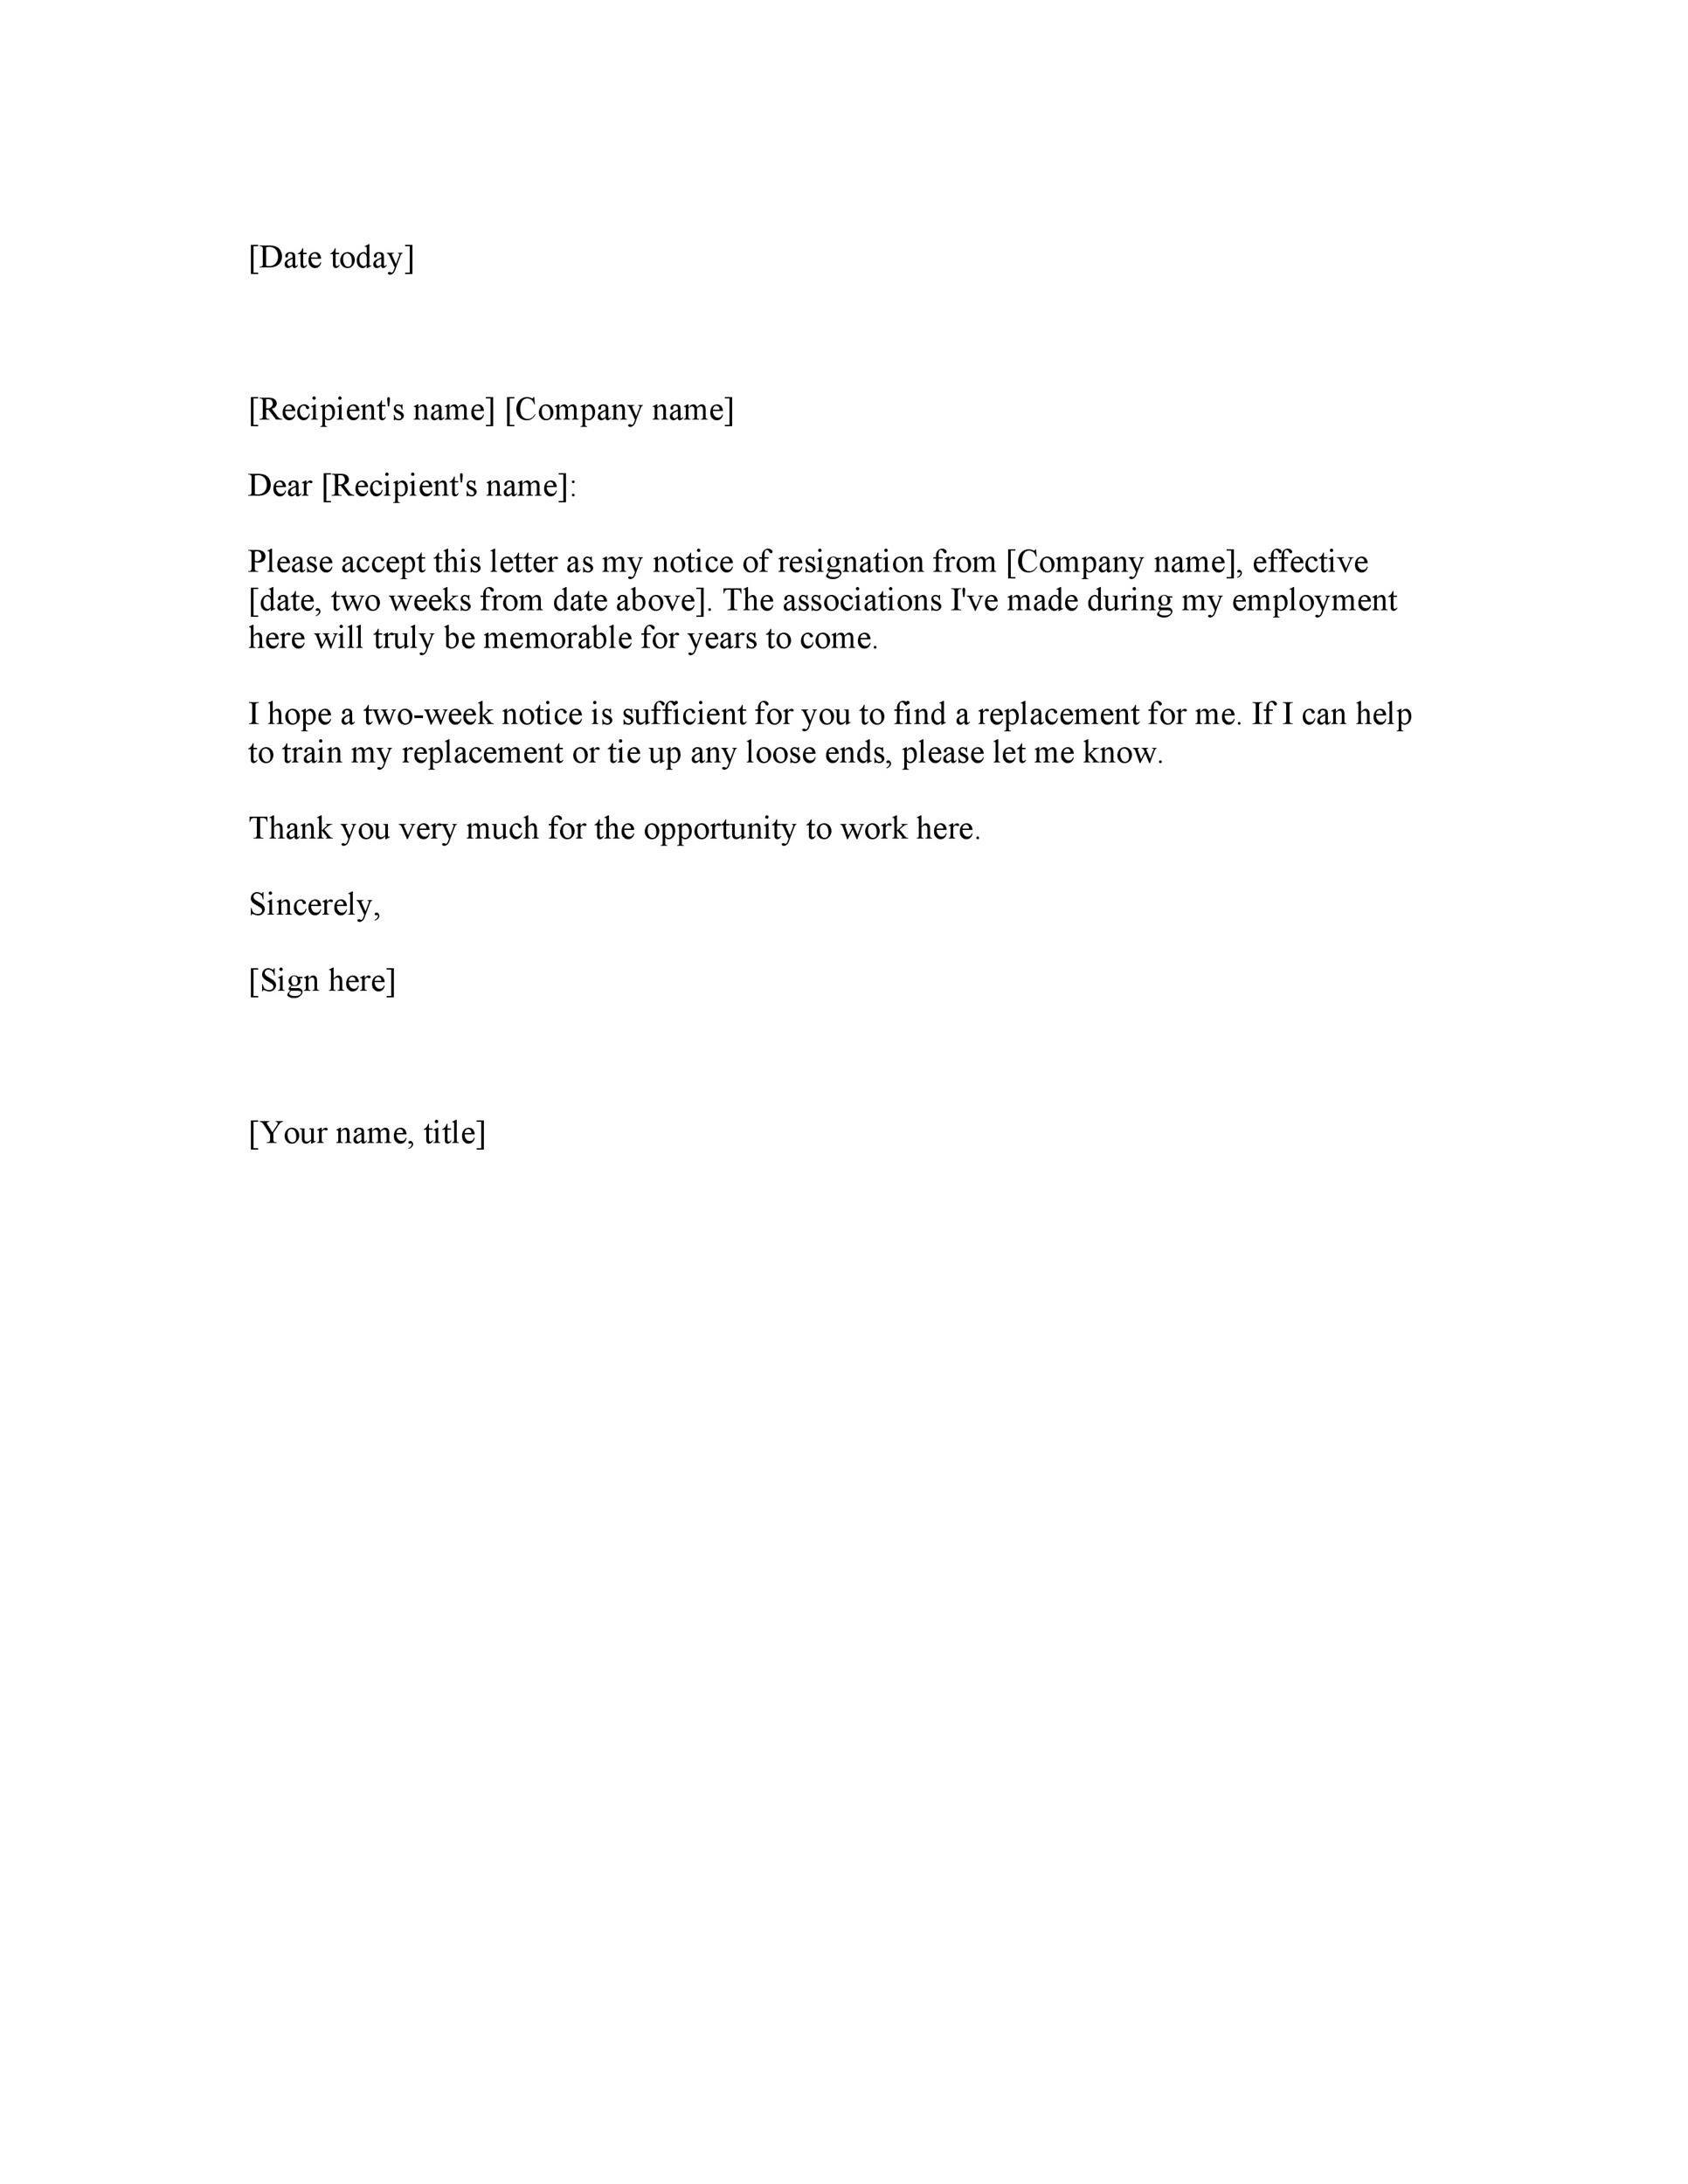 Two Weeks Notice Resignation Letter Sample from templatelab.com